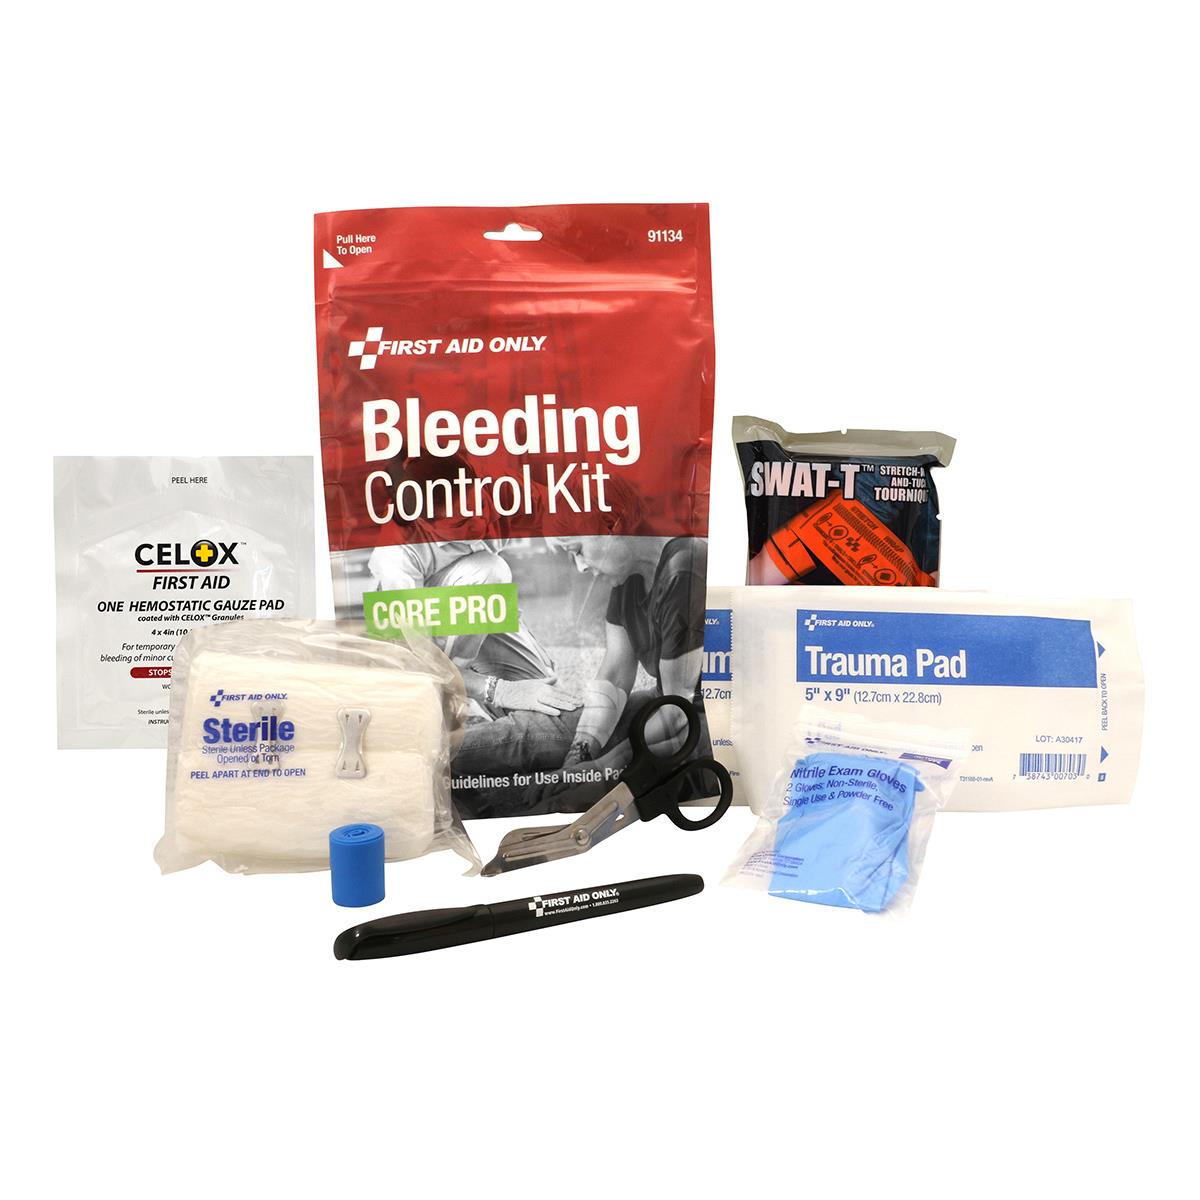 First Aid Only® Core Pro Bleeding Control Kit